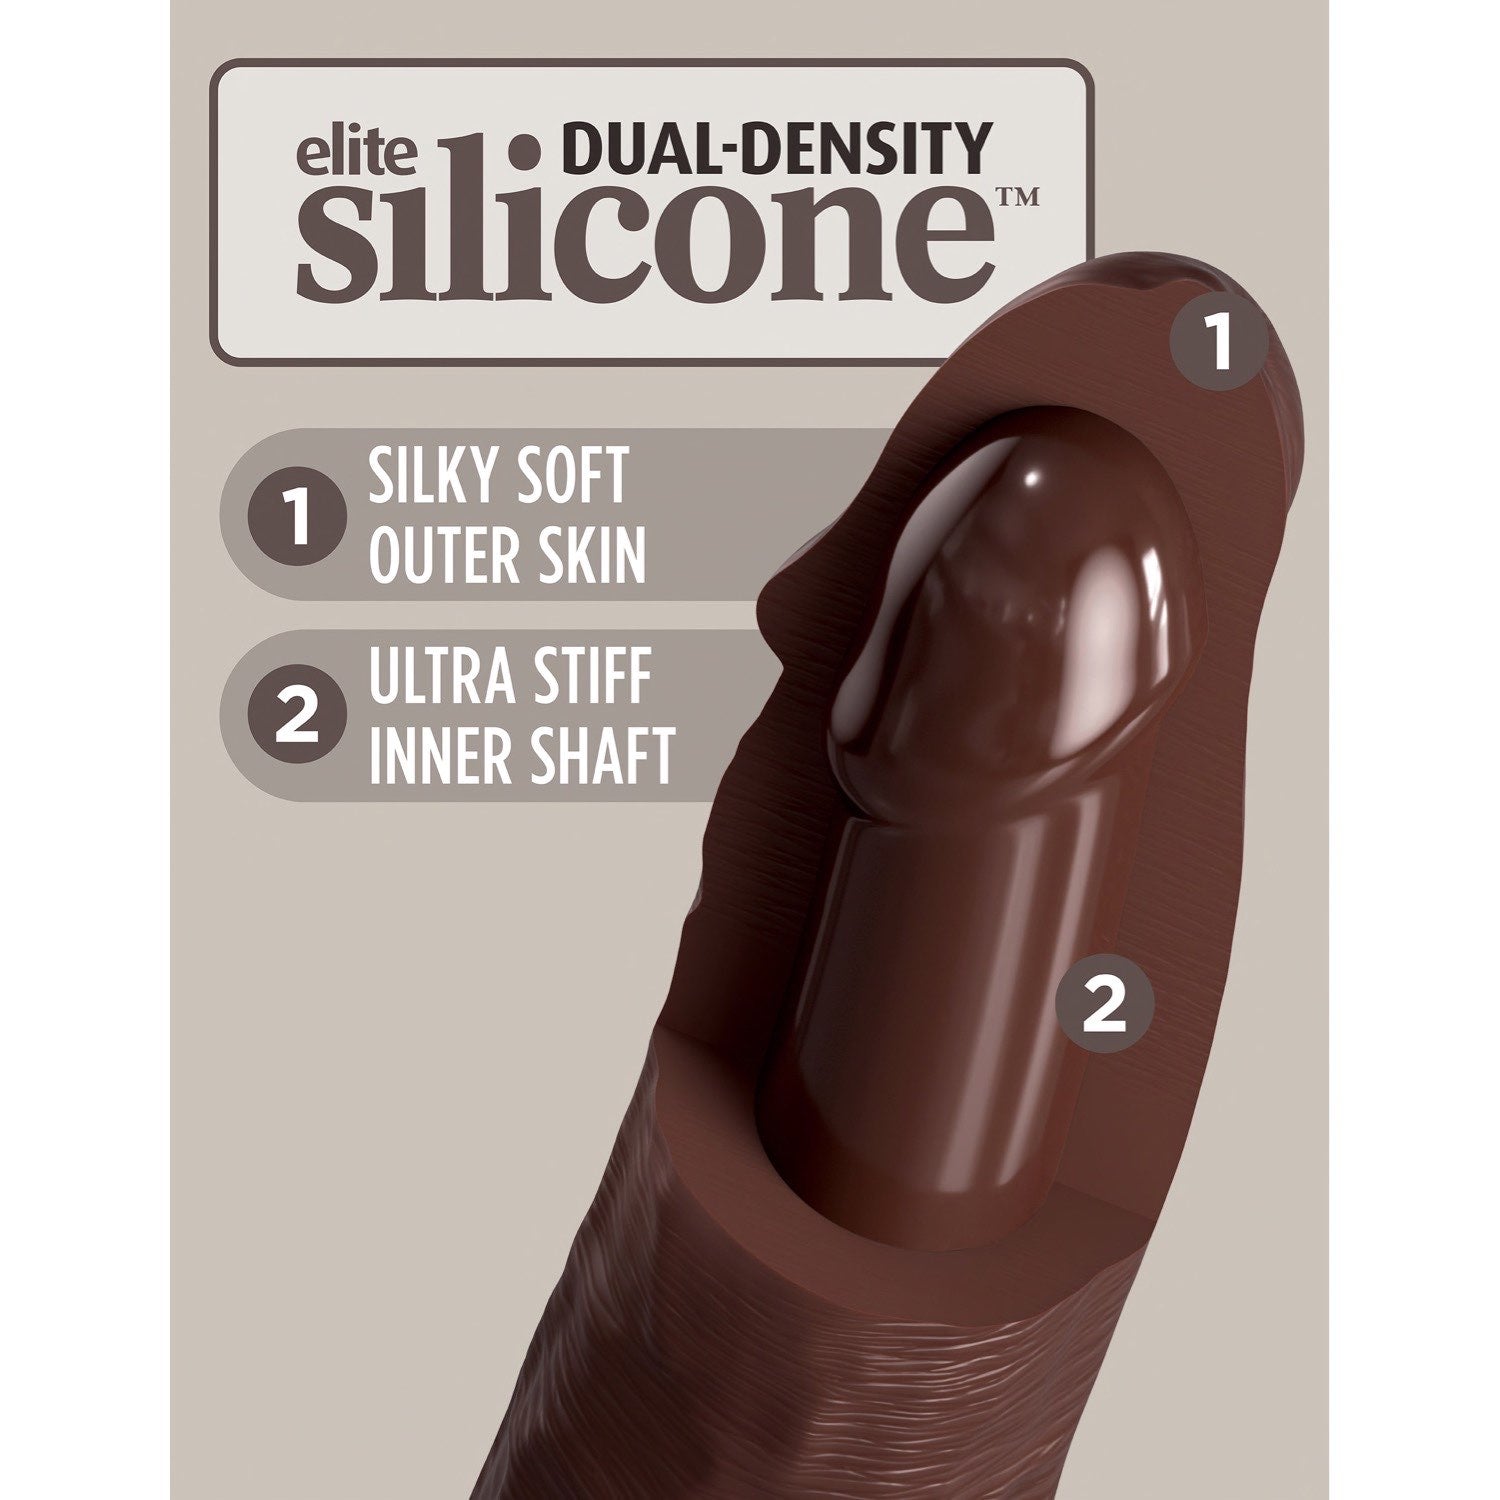 King Cock Elite 8&quot; Dual Density Cock - Brown - Brown 20.3 cm Dong by Pipedream